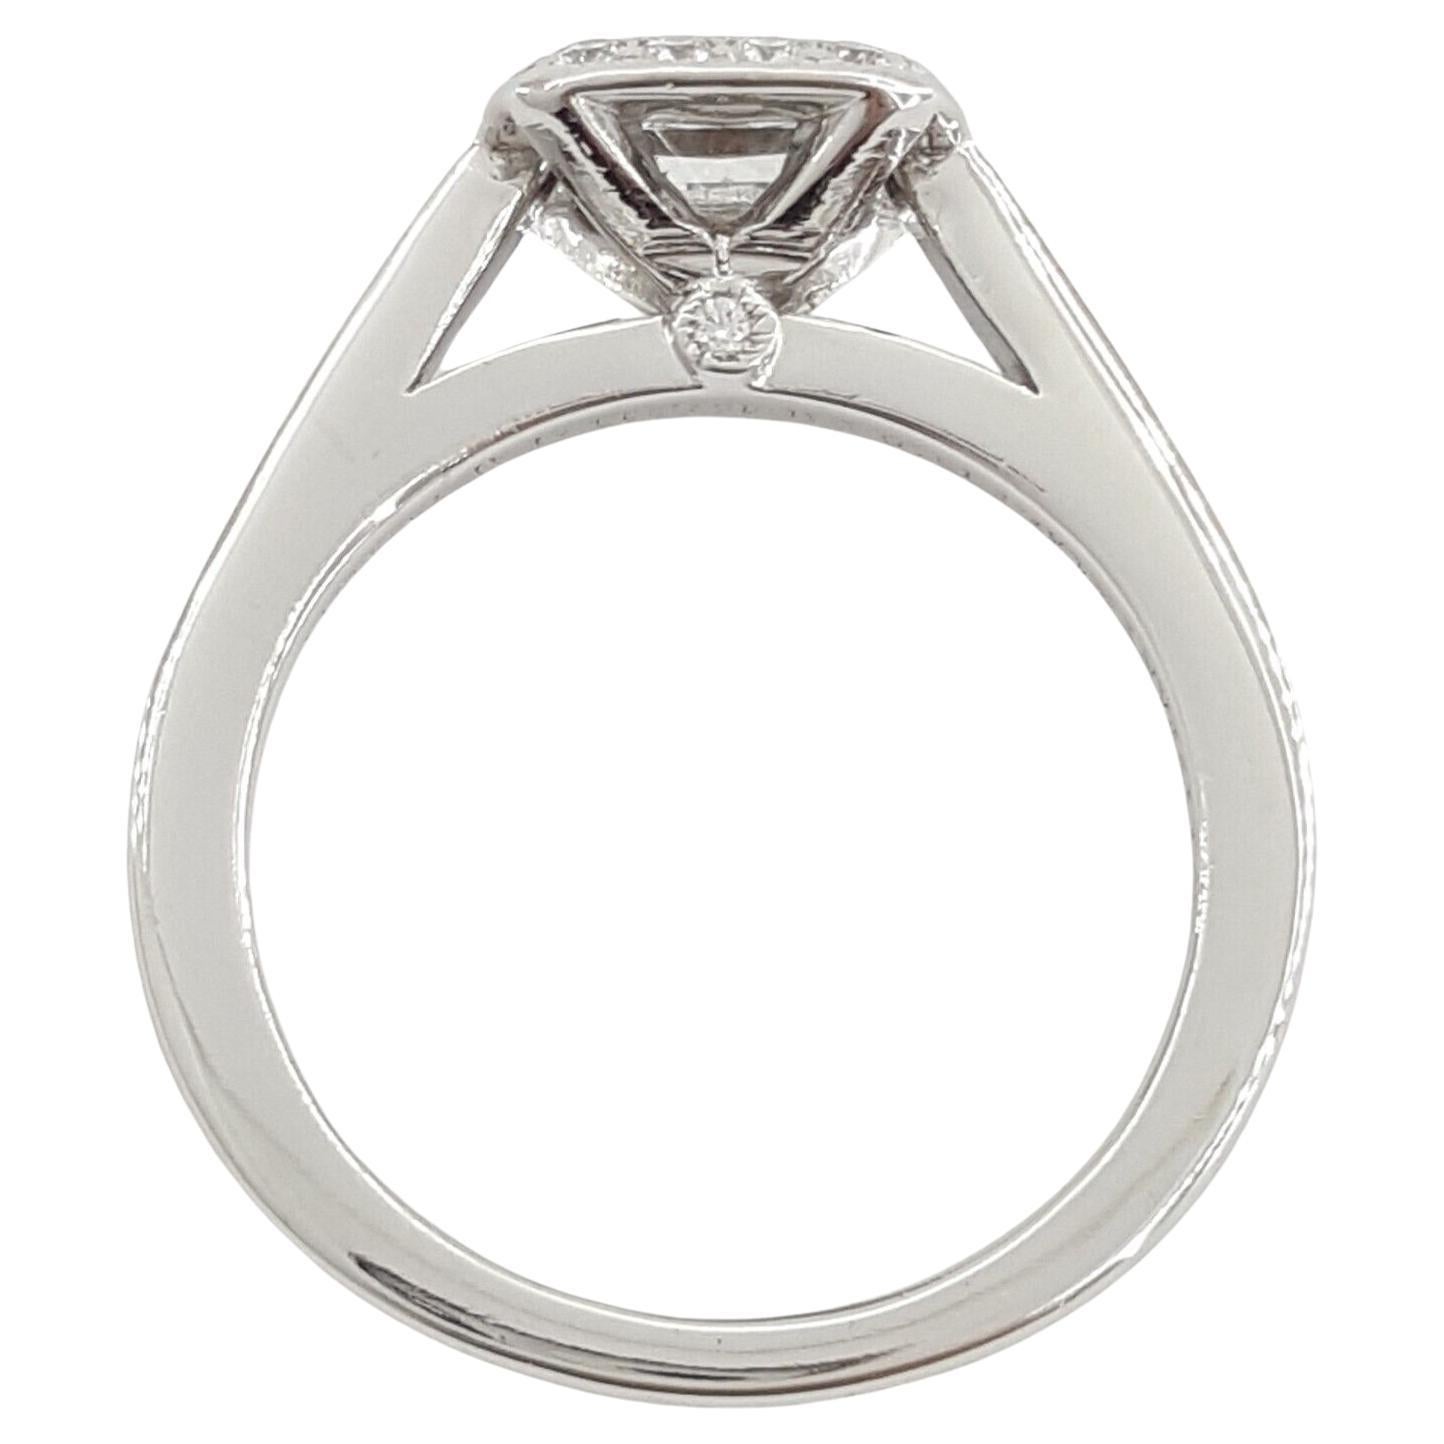 This exquisite engagement ring from Tiffany & Co.'s Platinum Legacy collection is a symbol of luxurious elegance and timeless design. The ring, crafted in platinum, weighs 4.5 grams and is sized at 4, offering a refined and comfortable fit.

The